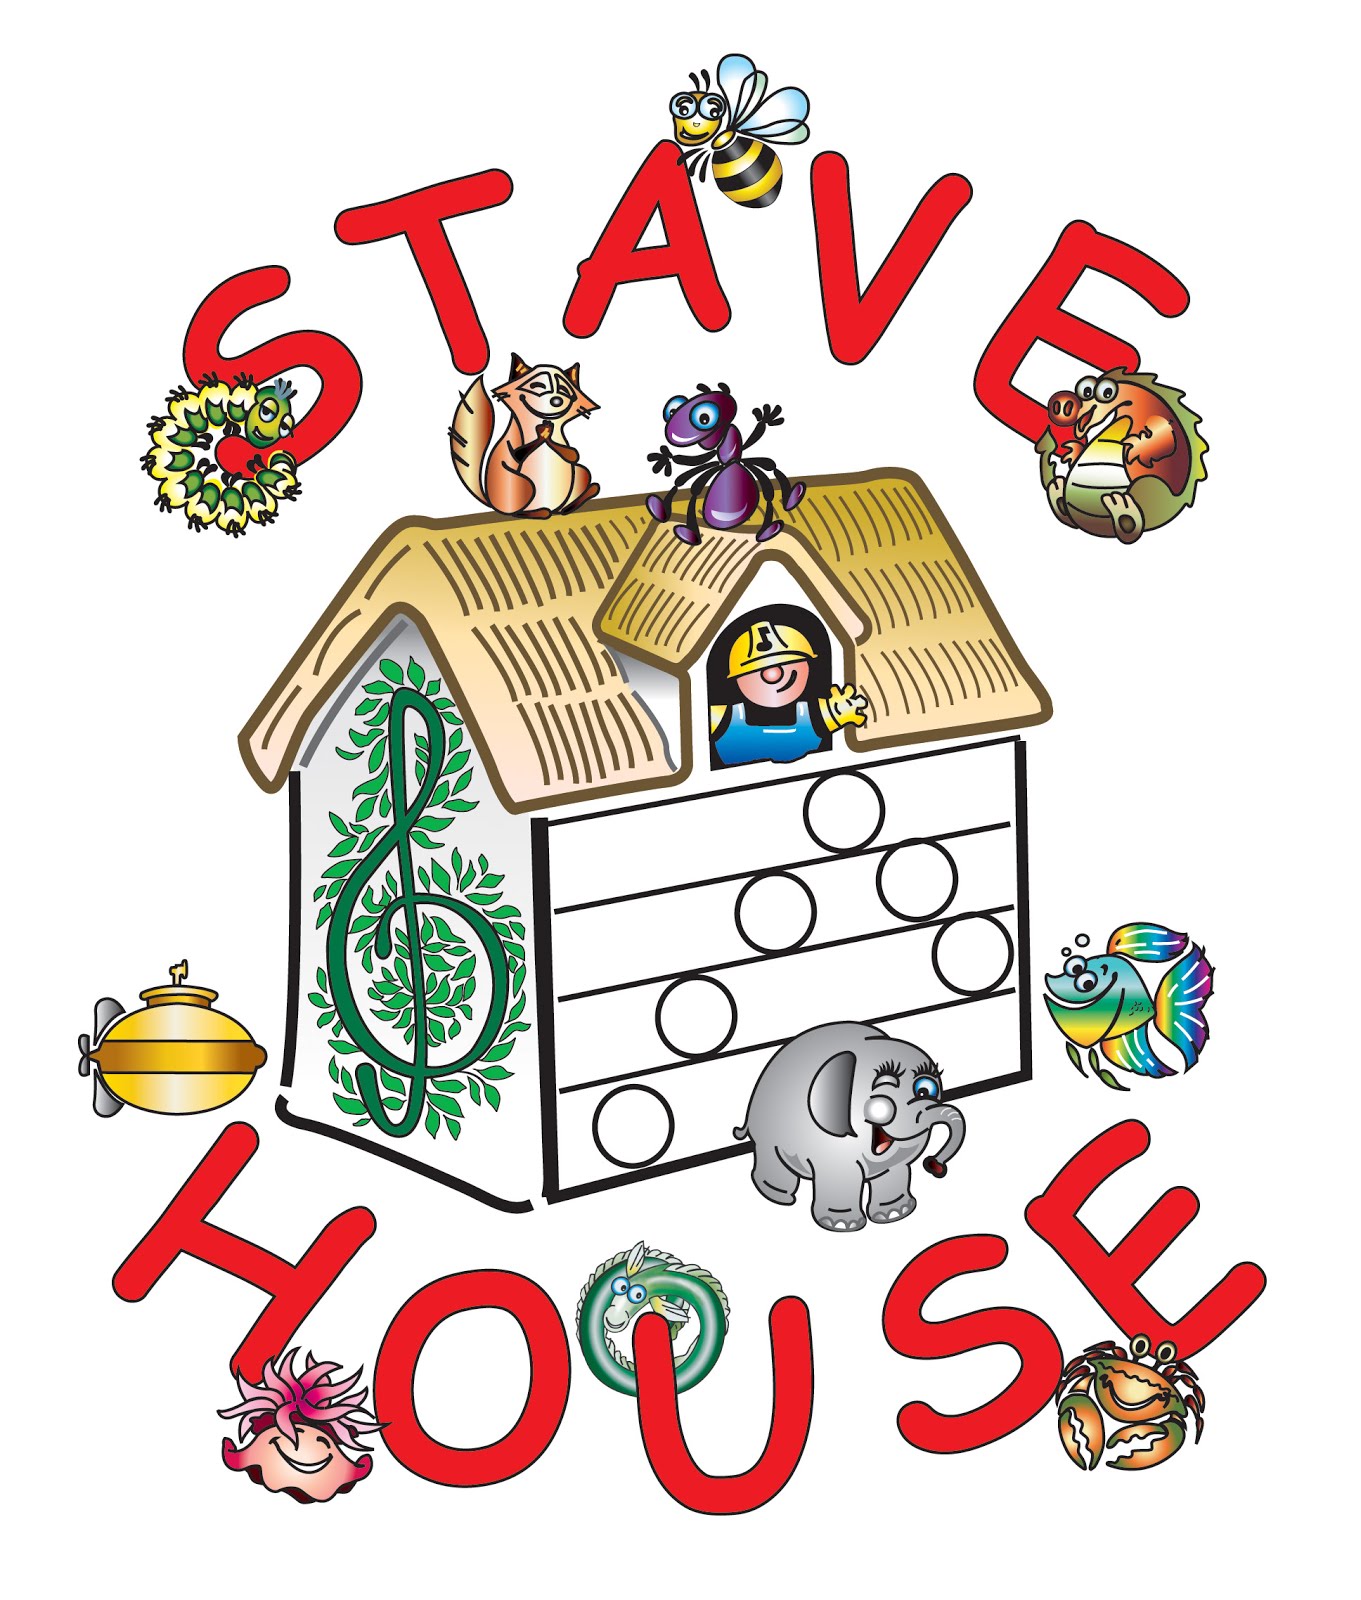 Trained, Authorized & Licensed Stave House Tutor